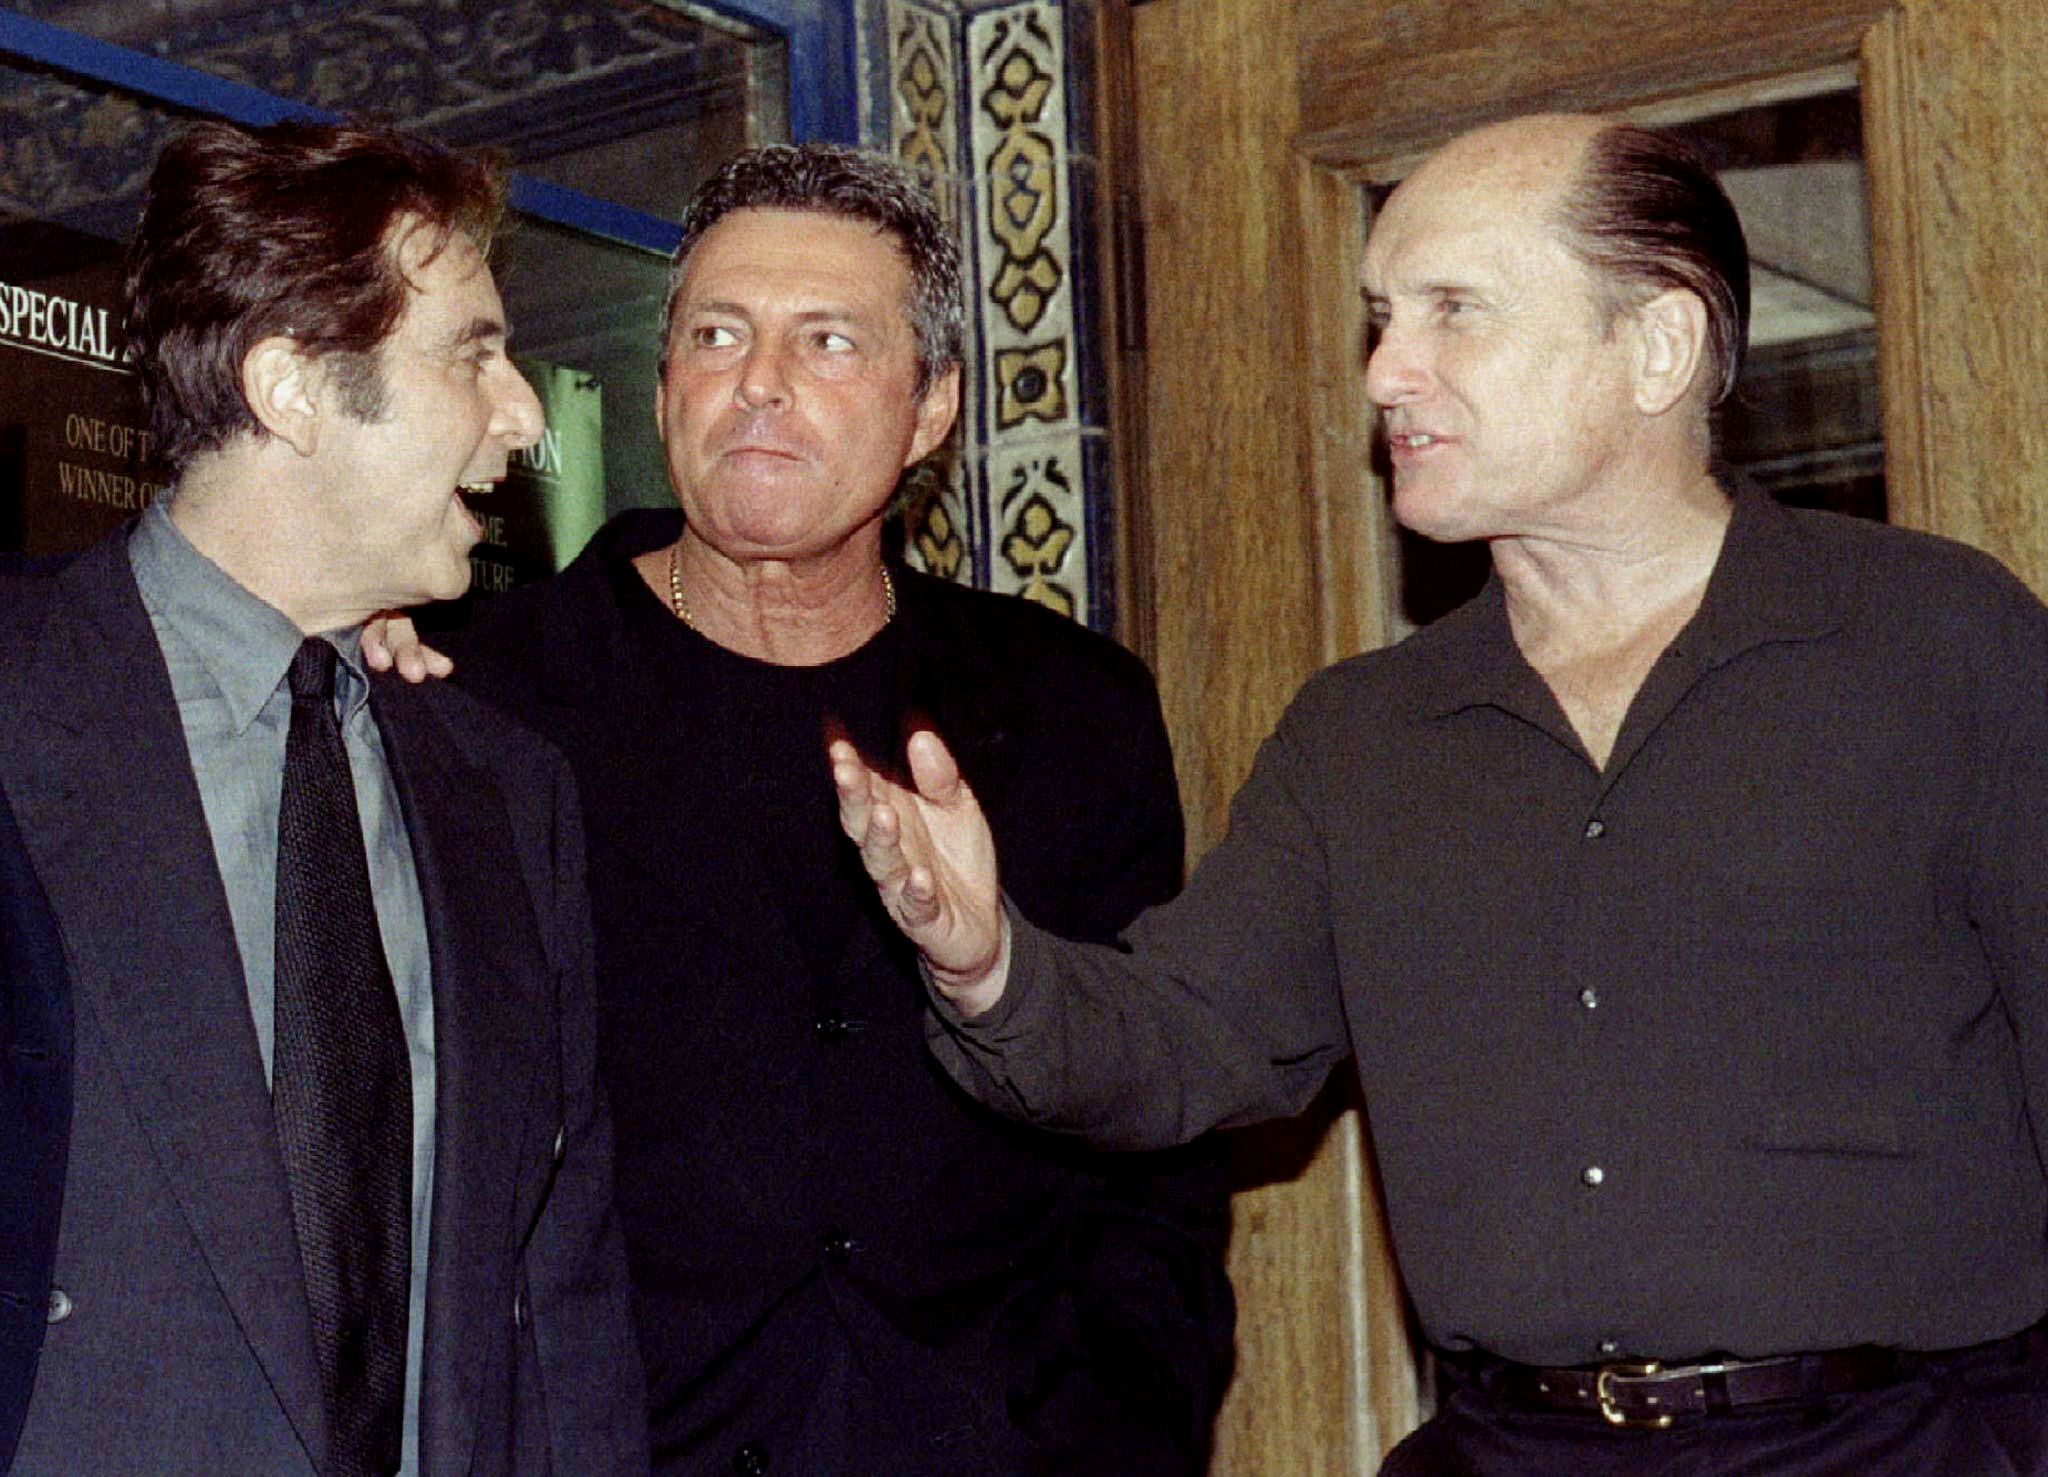 PODCAST – Tuesday, March 15: CT Real Estate; Gianni Russo’s “Godfather” Stories; Helping Bubba￼